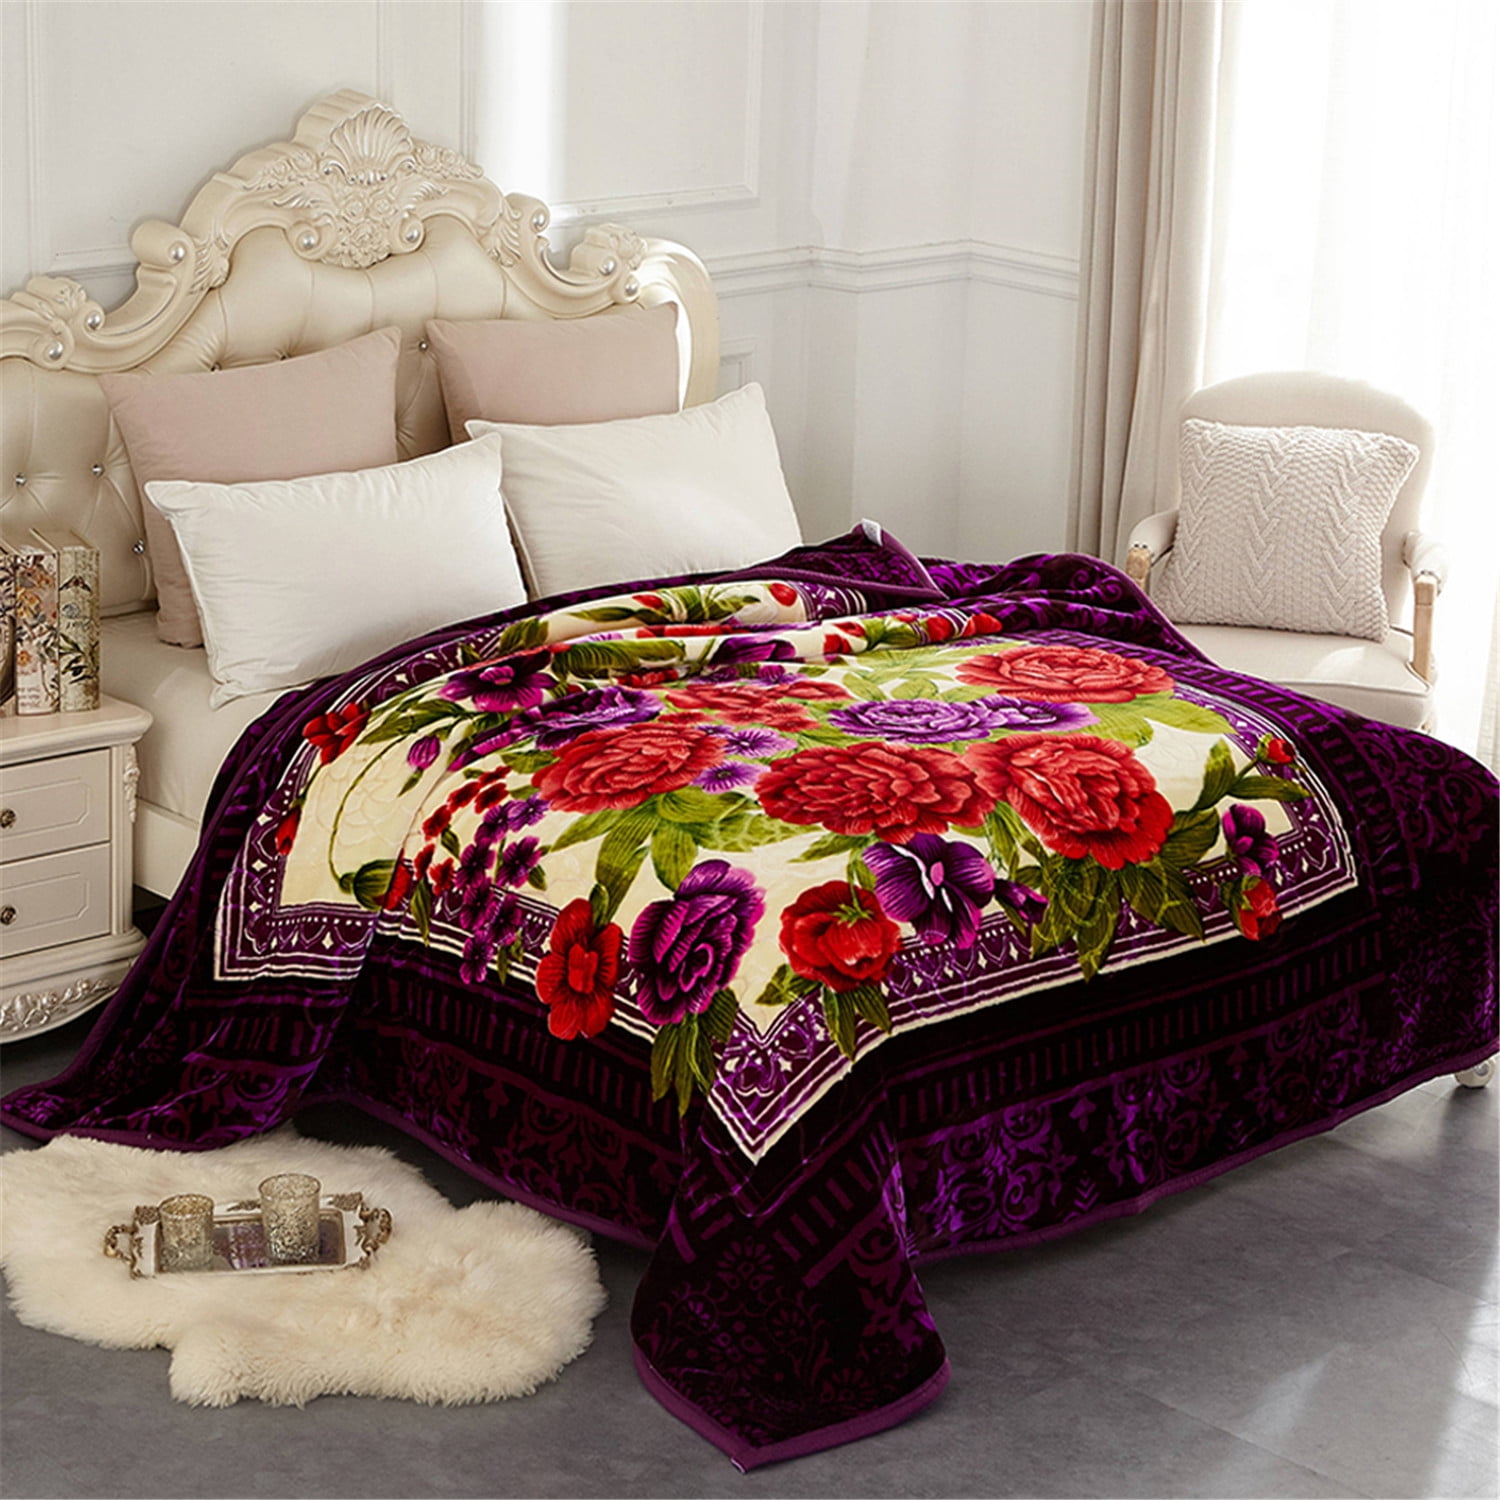 High Quality Wool Material Quilt Comforter Winter Thick Blanket Solid Color Soft 